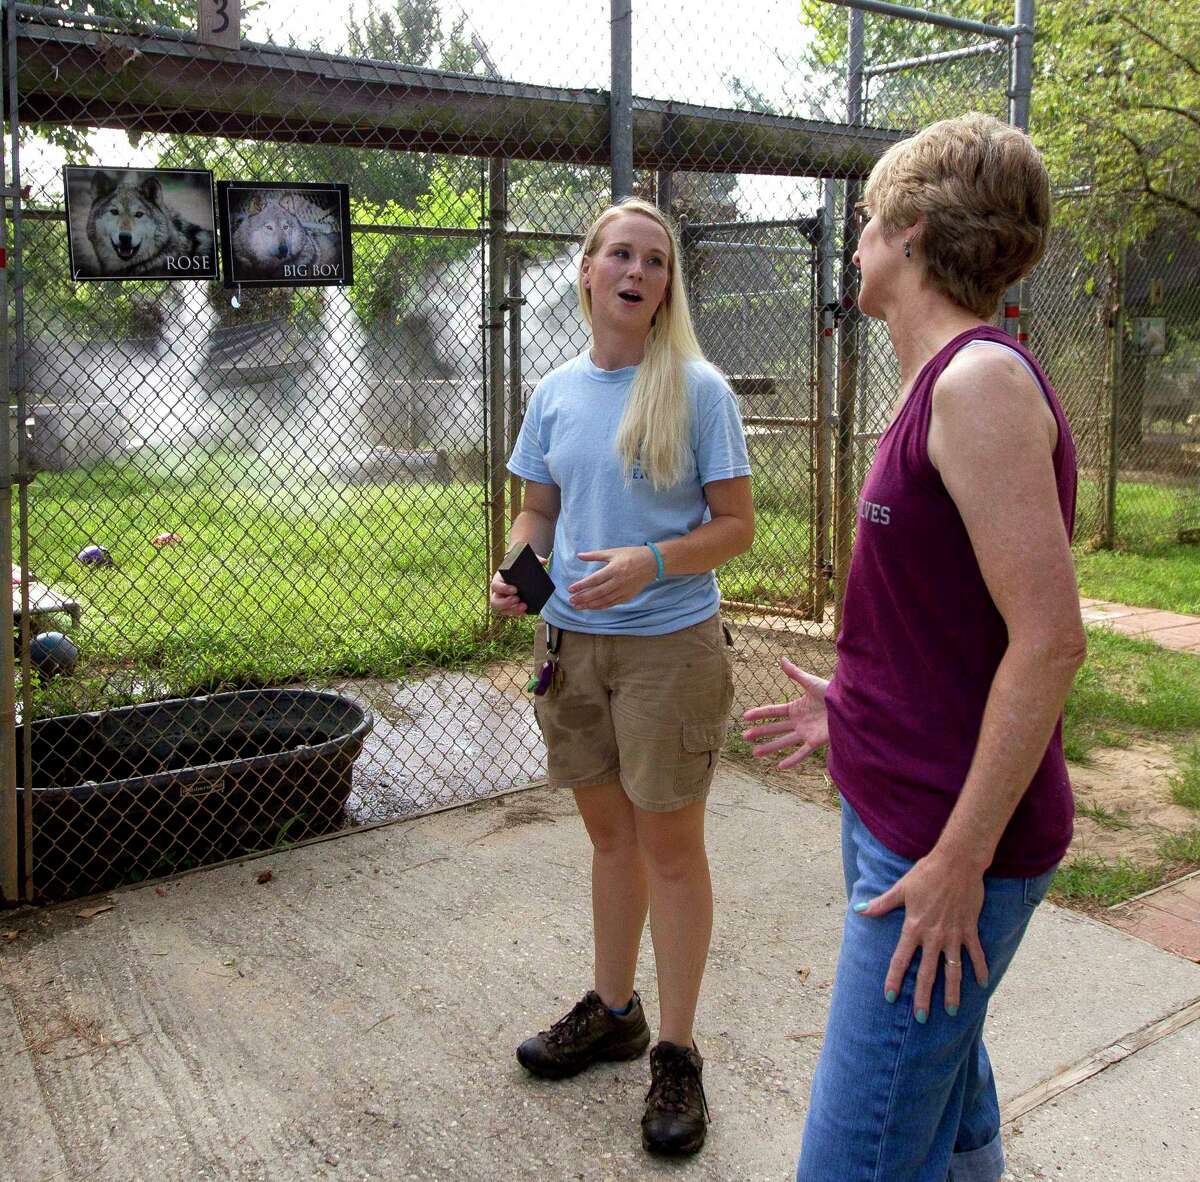 Brittany McDonald, new manager at Saint Francis Wolf Sanctuary, chats with volunteer Sharon Dalton, Friday, July 21, 2017, in Montgomery. McDonald is still meeting several of the 30 volunteers that help run the sanctuary which provides a permanent home for 16 non-releasable wolves and wolfdogs, in addition to educating the public about wolves, conservation and other related issues.